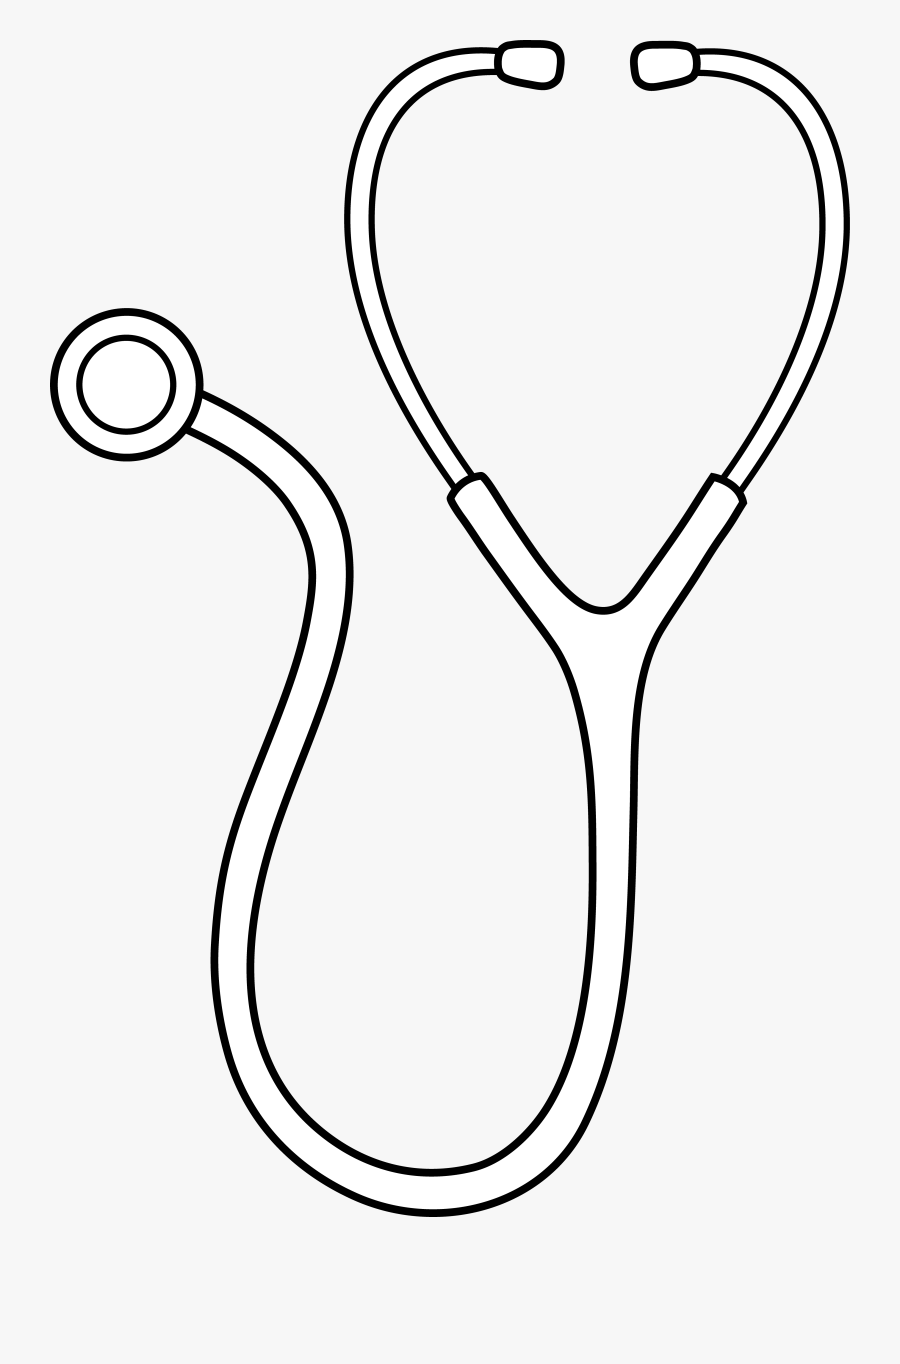 Stethoscope Clipart Black And White, Transparent Clipart